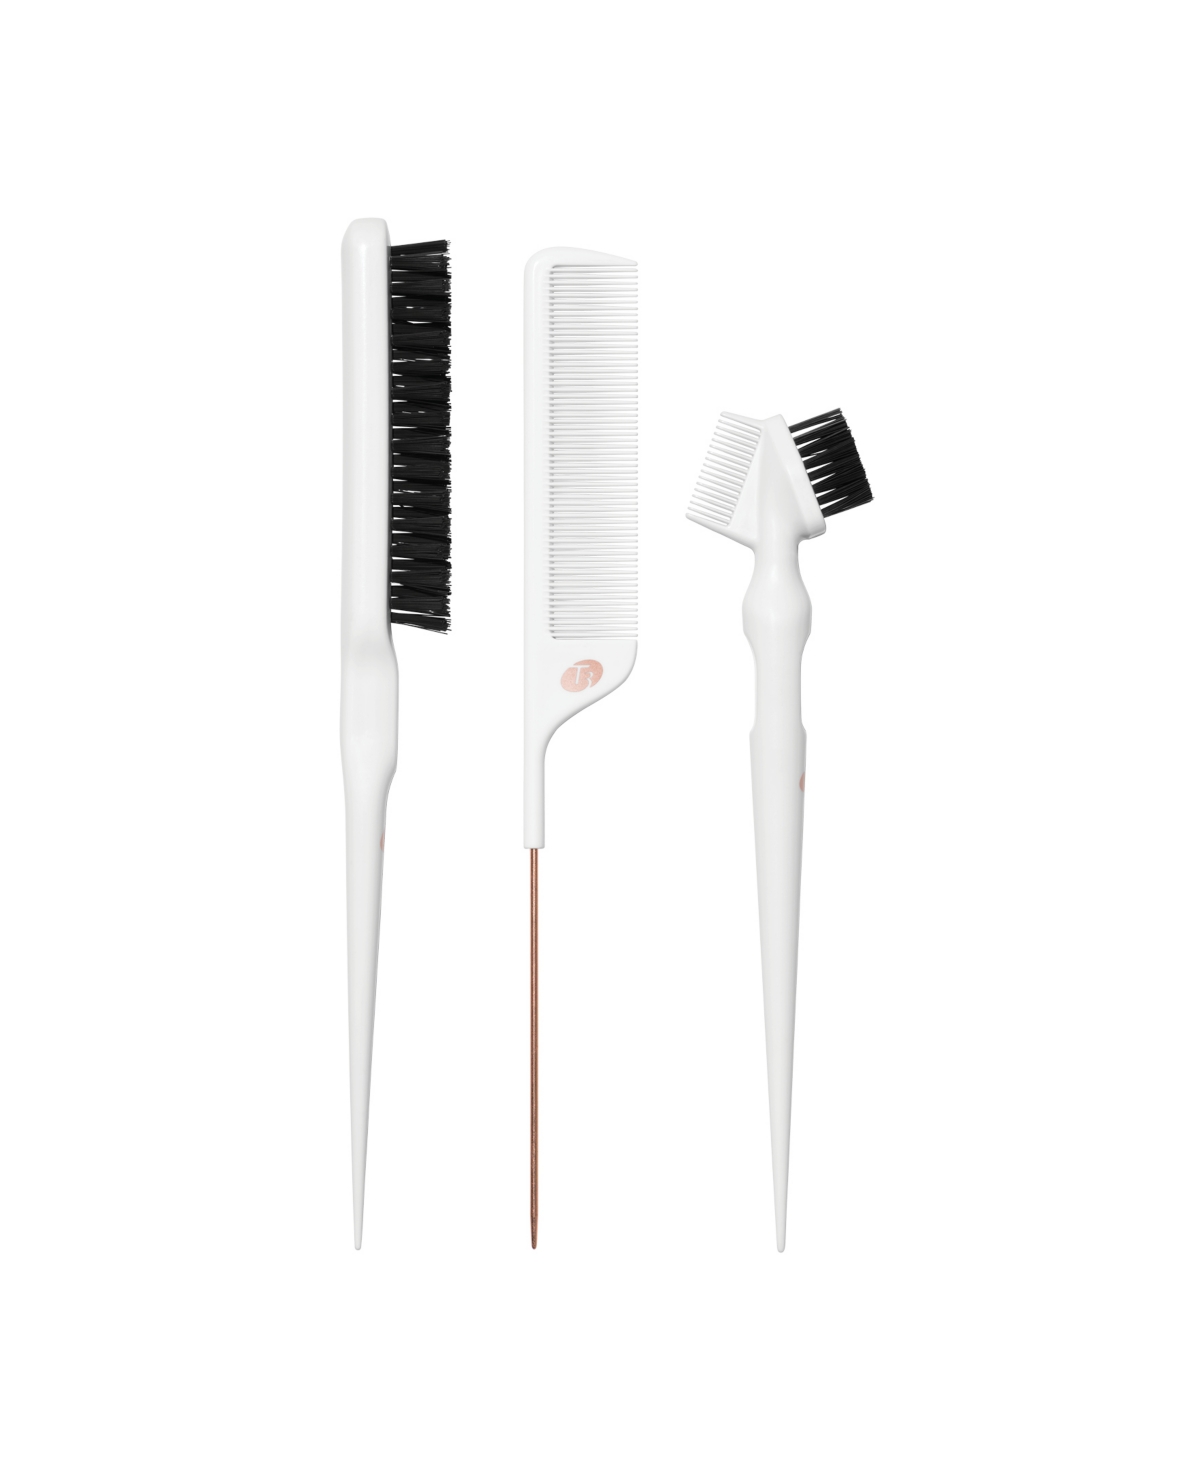 T3 Detail Set With Pintail Comb, Edge Brush, And Teasing Brush, 3 Piece